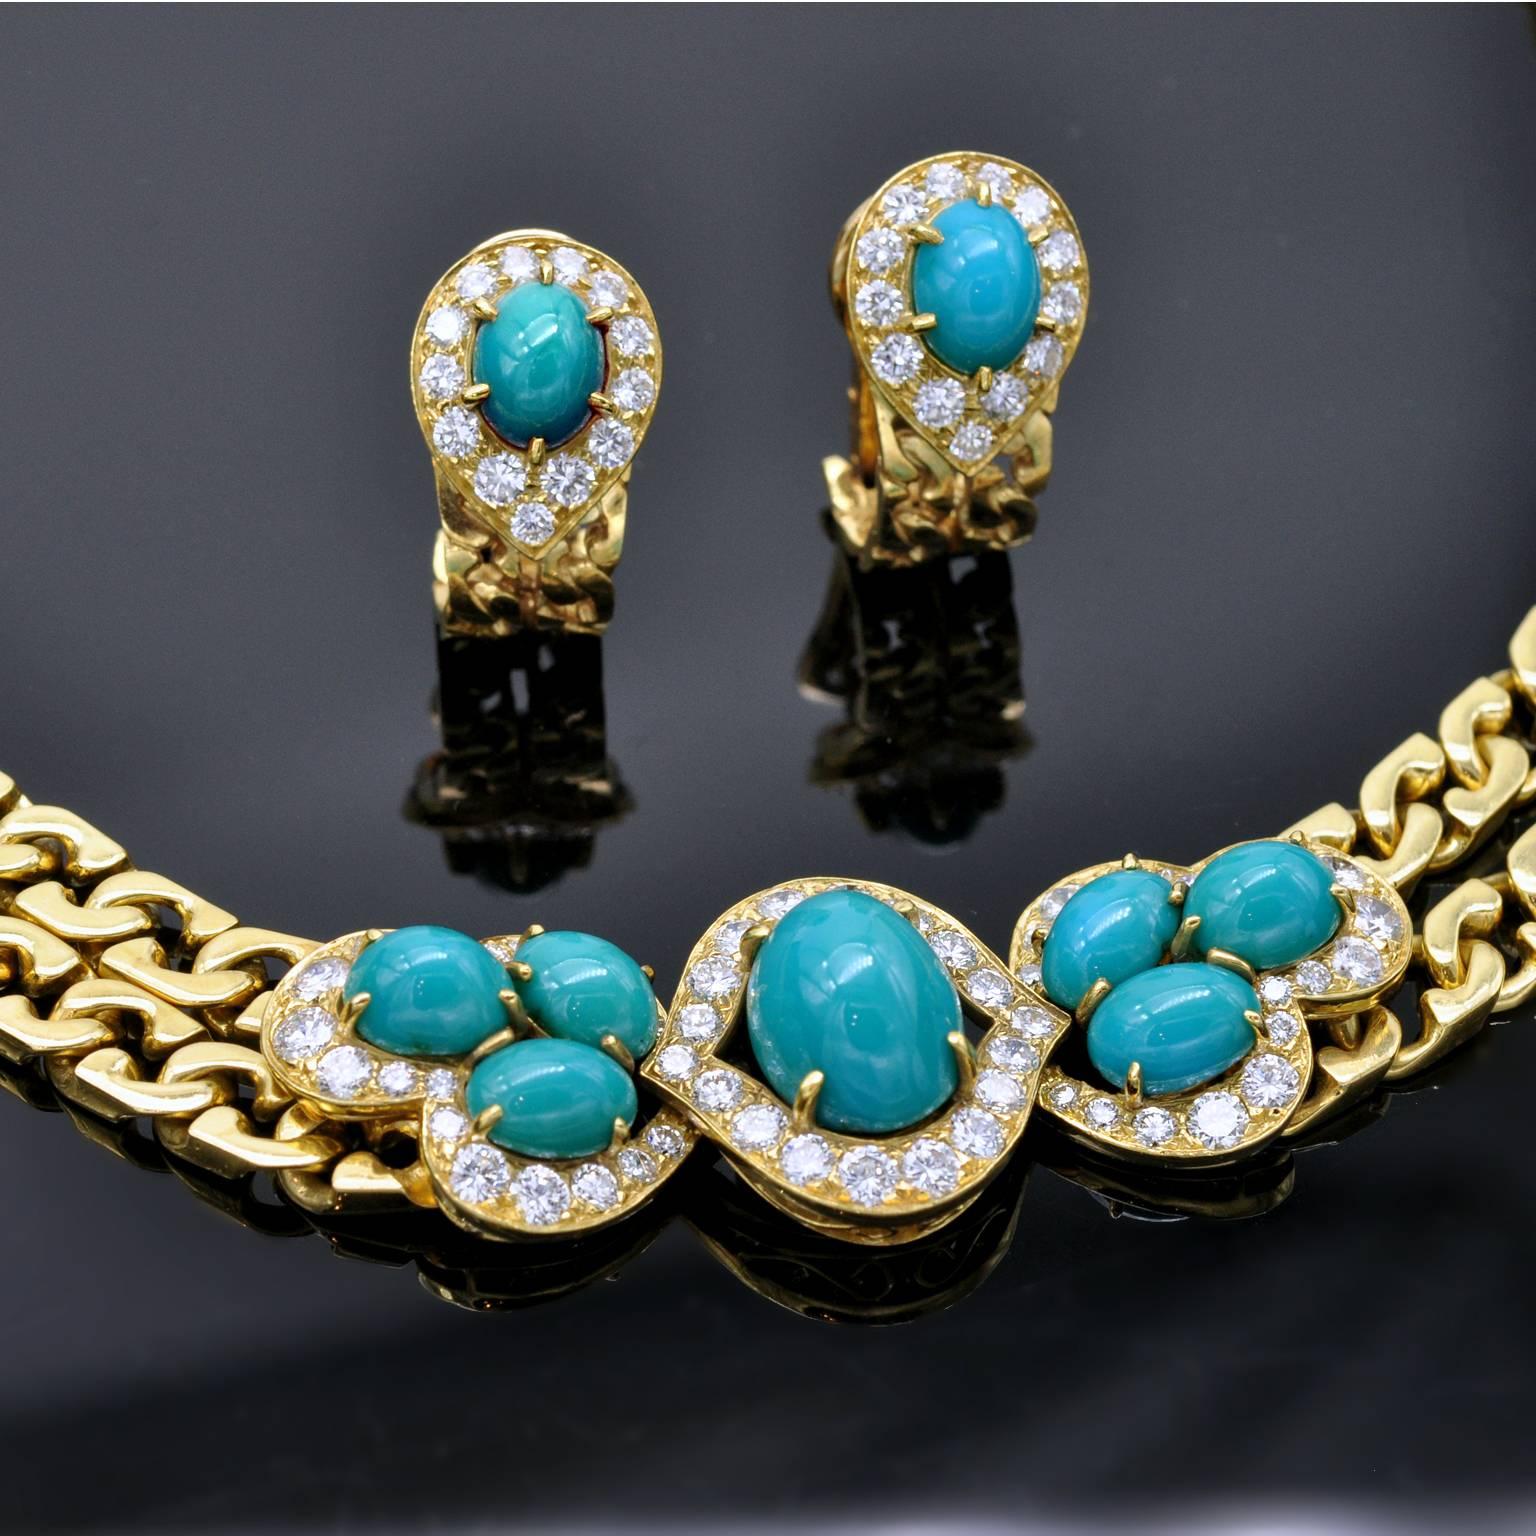 Ravishing set consisting of a necklace and pair of earrings set with turquoises and top quality round diamonds. 
The make is excellent; the necklace sit perfectly around the neck in a very natural way as well as the clip on earrings on the earlobes.